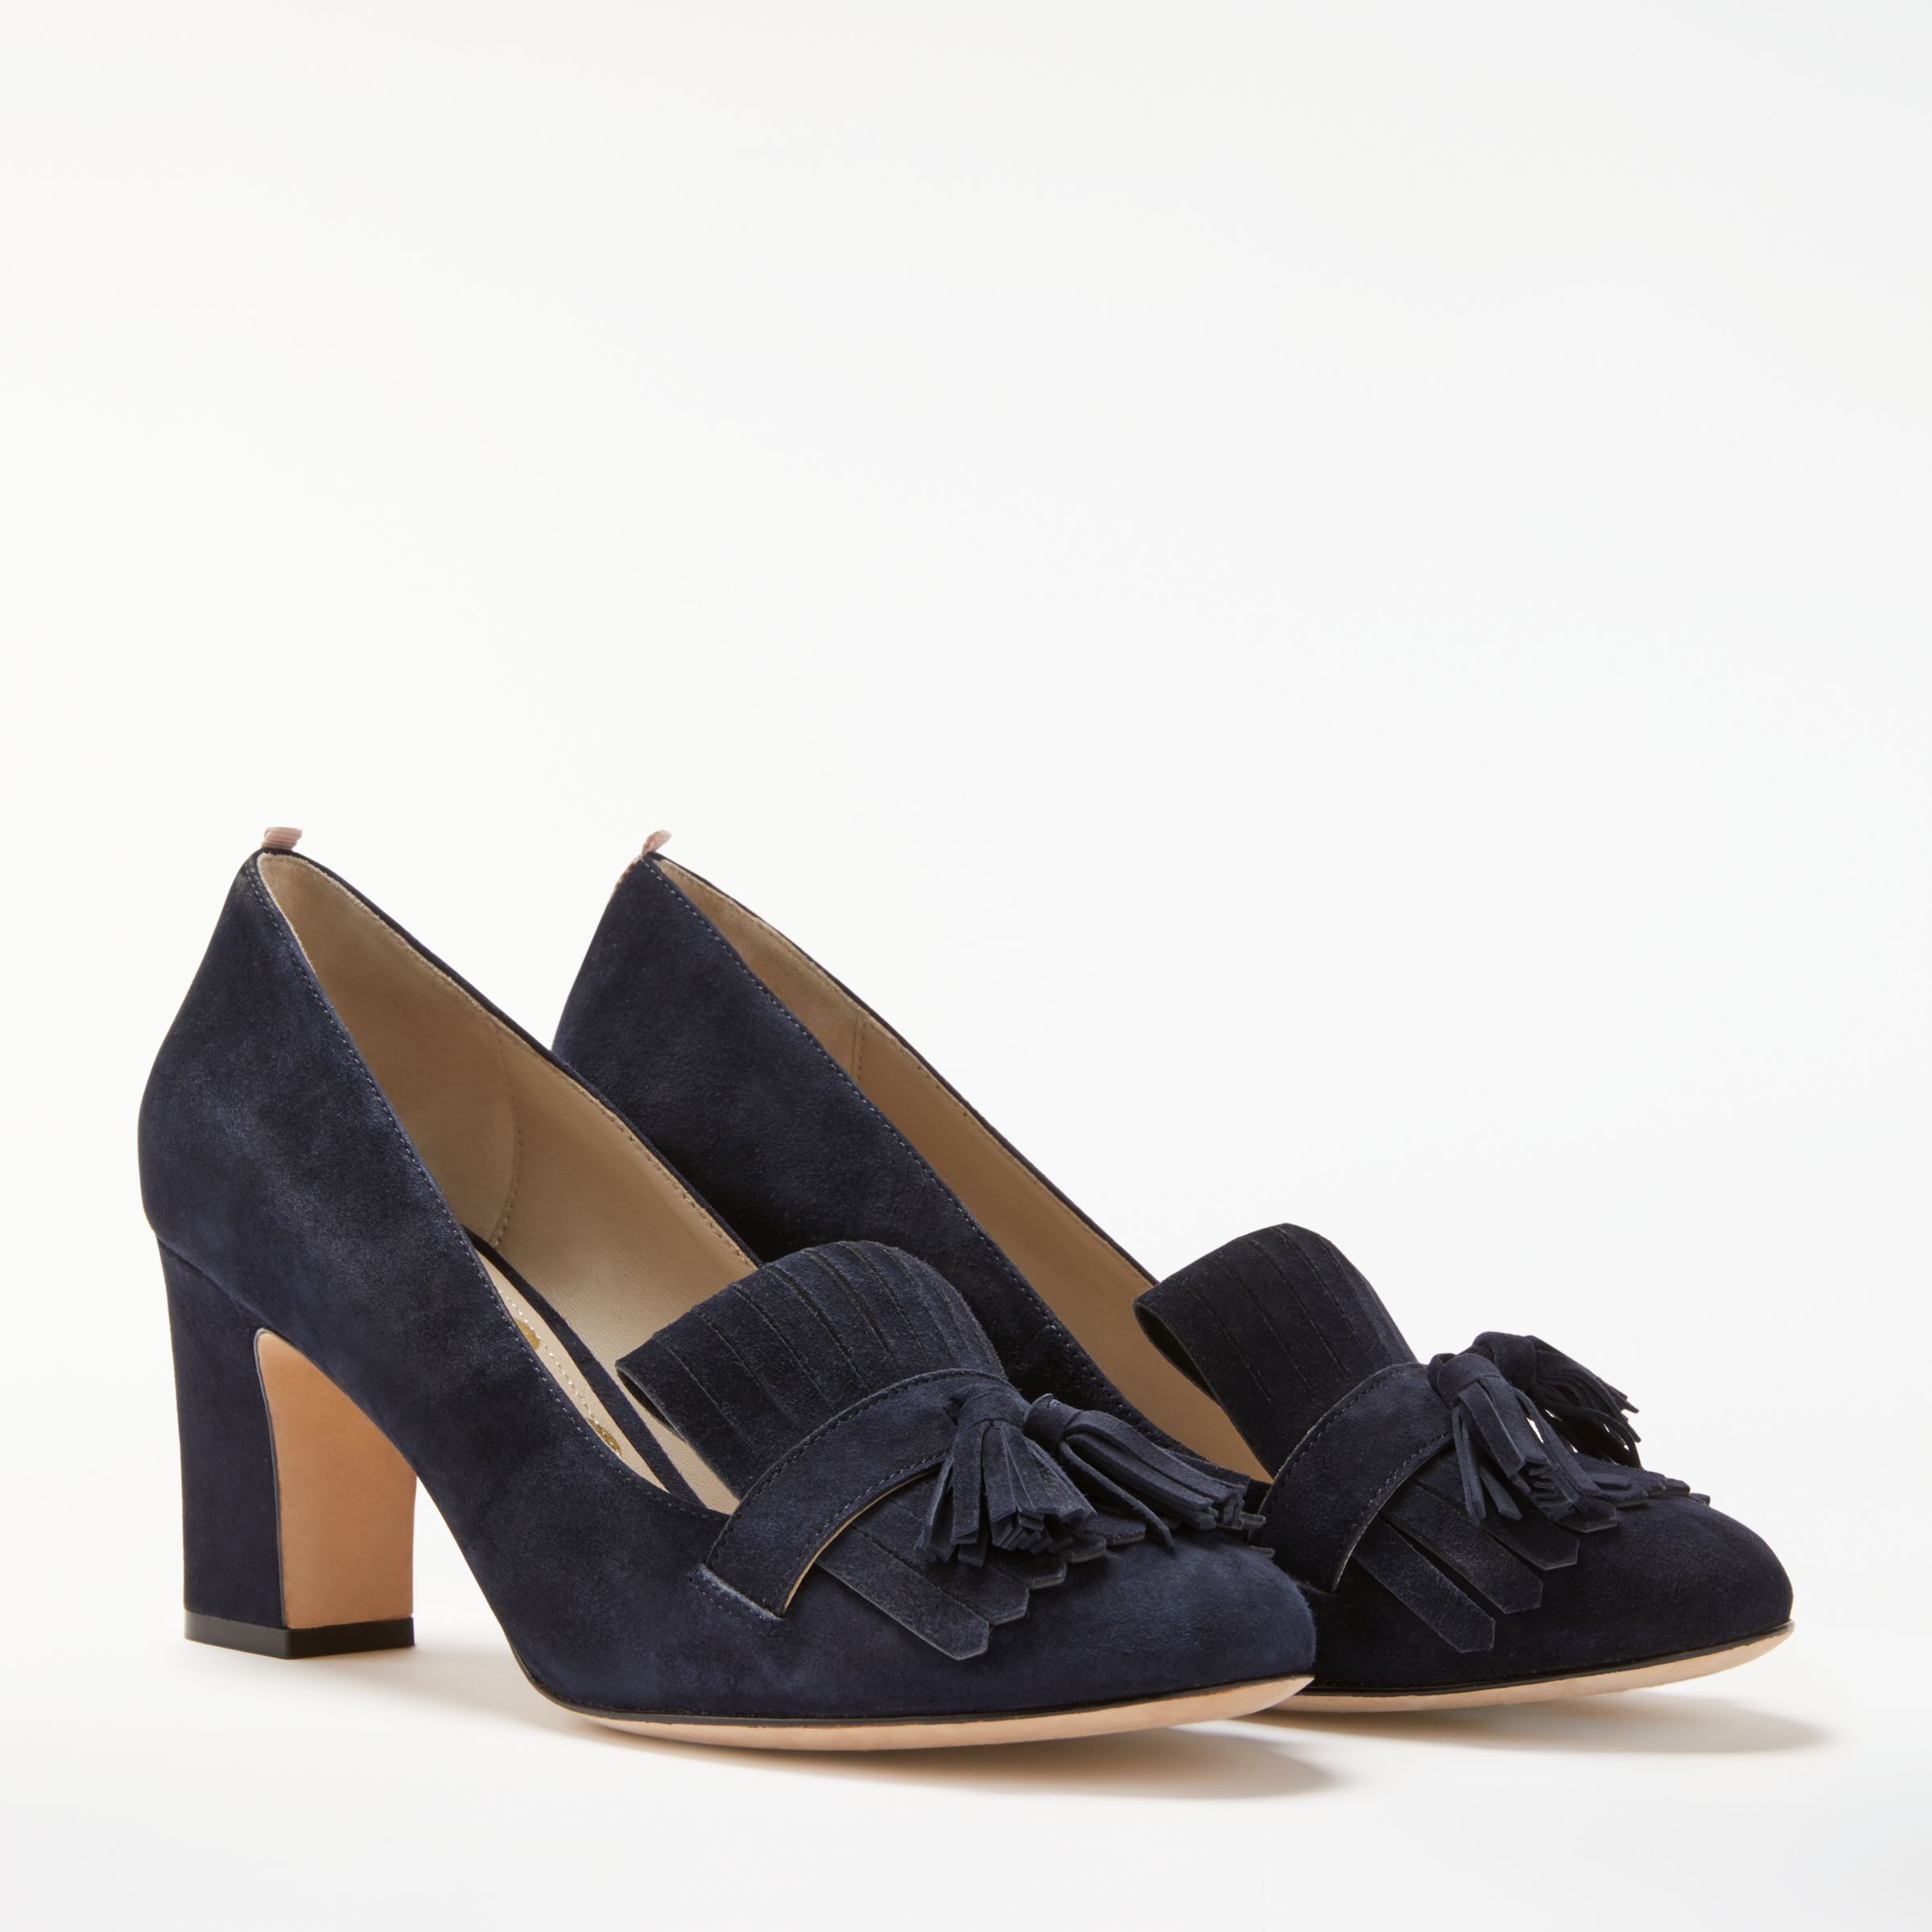 Boden Pippa Block Heeled Loafer Court Shoes, Navy Suede, 6